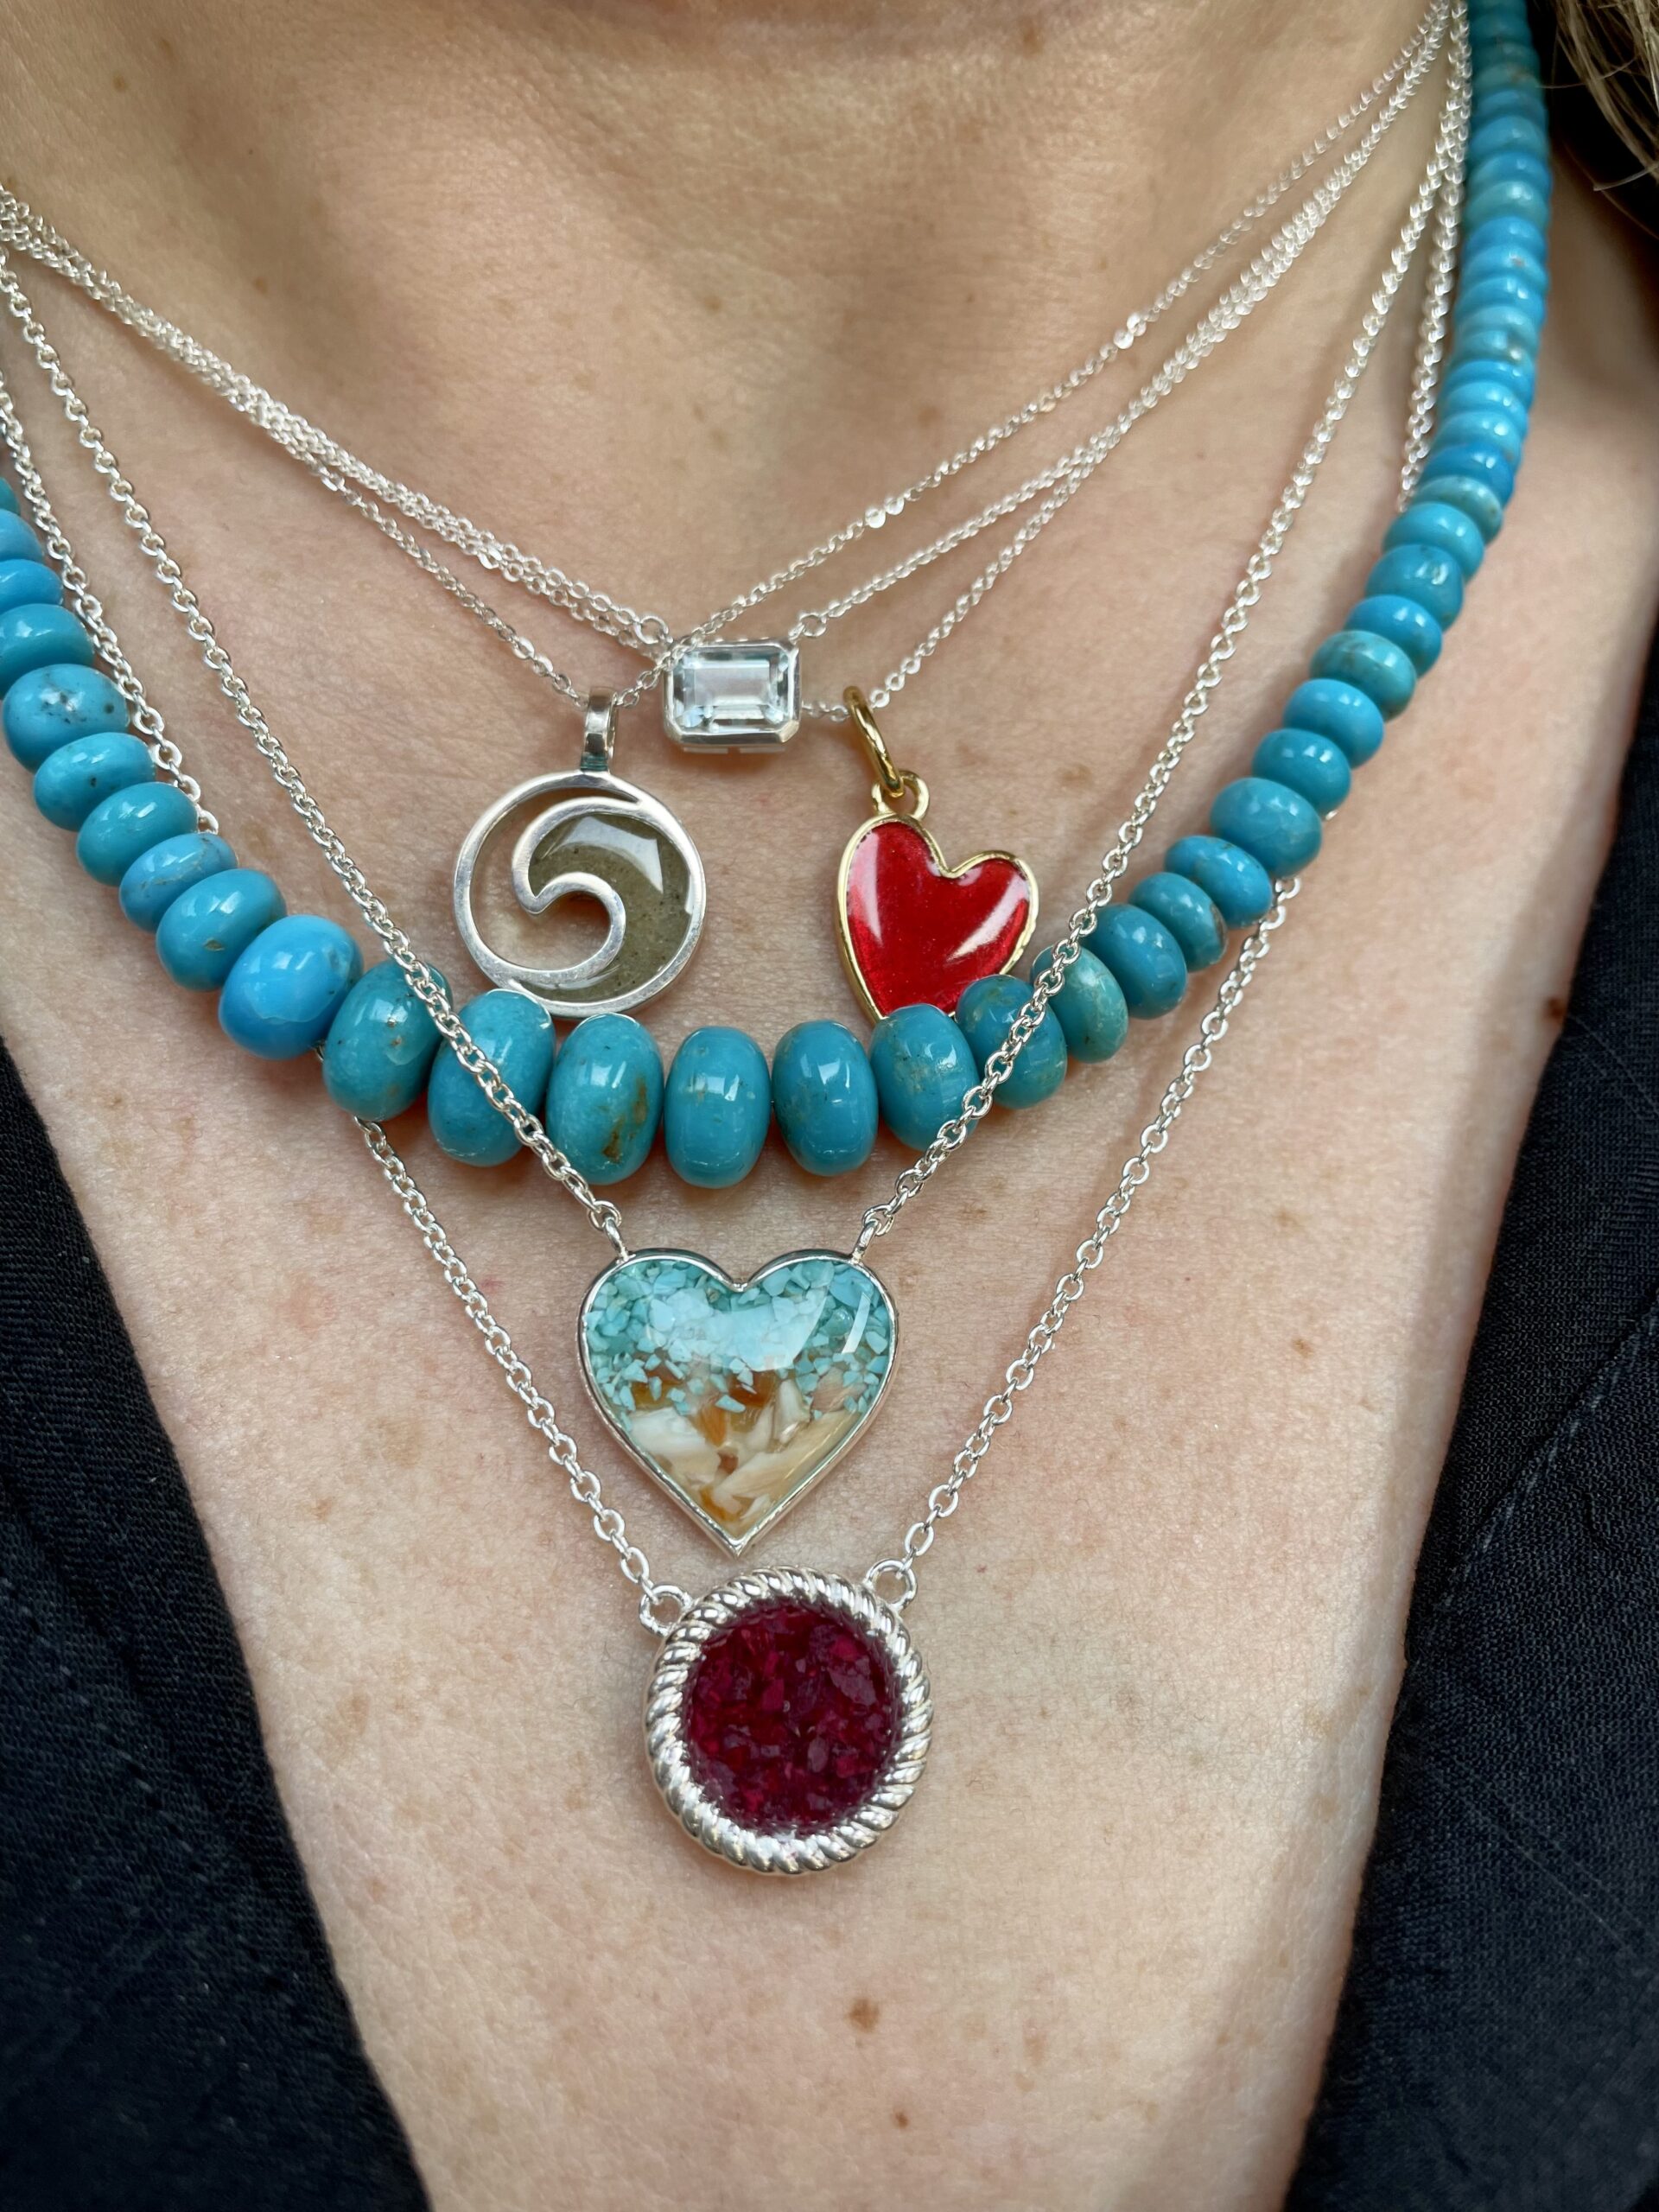 Colorful jewelry and symbolic necklaces layered on neck, turquoise jewelry, close-up.